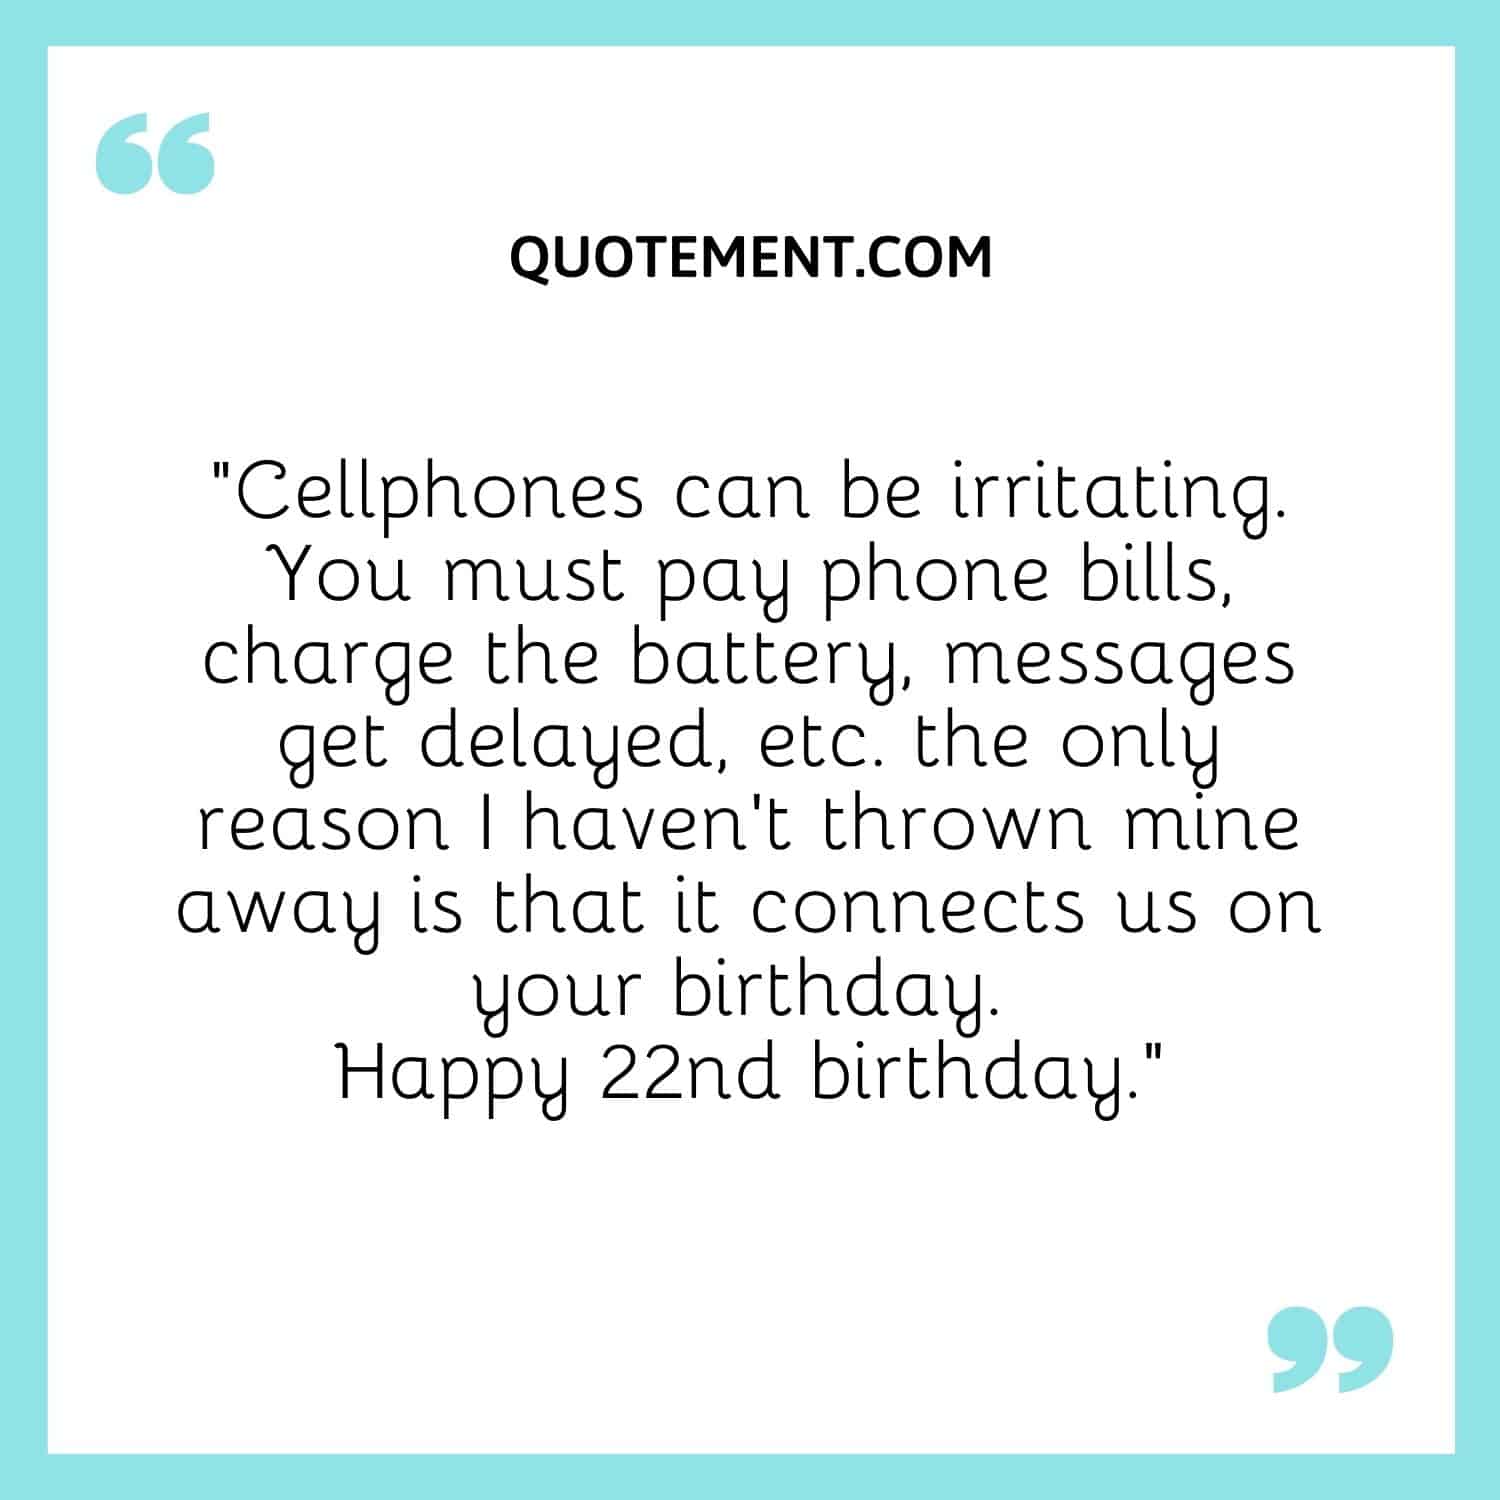 Cellphones can be irritating